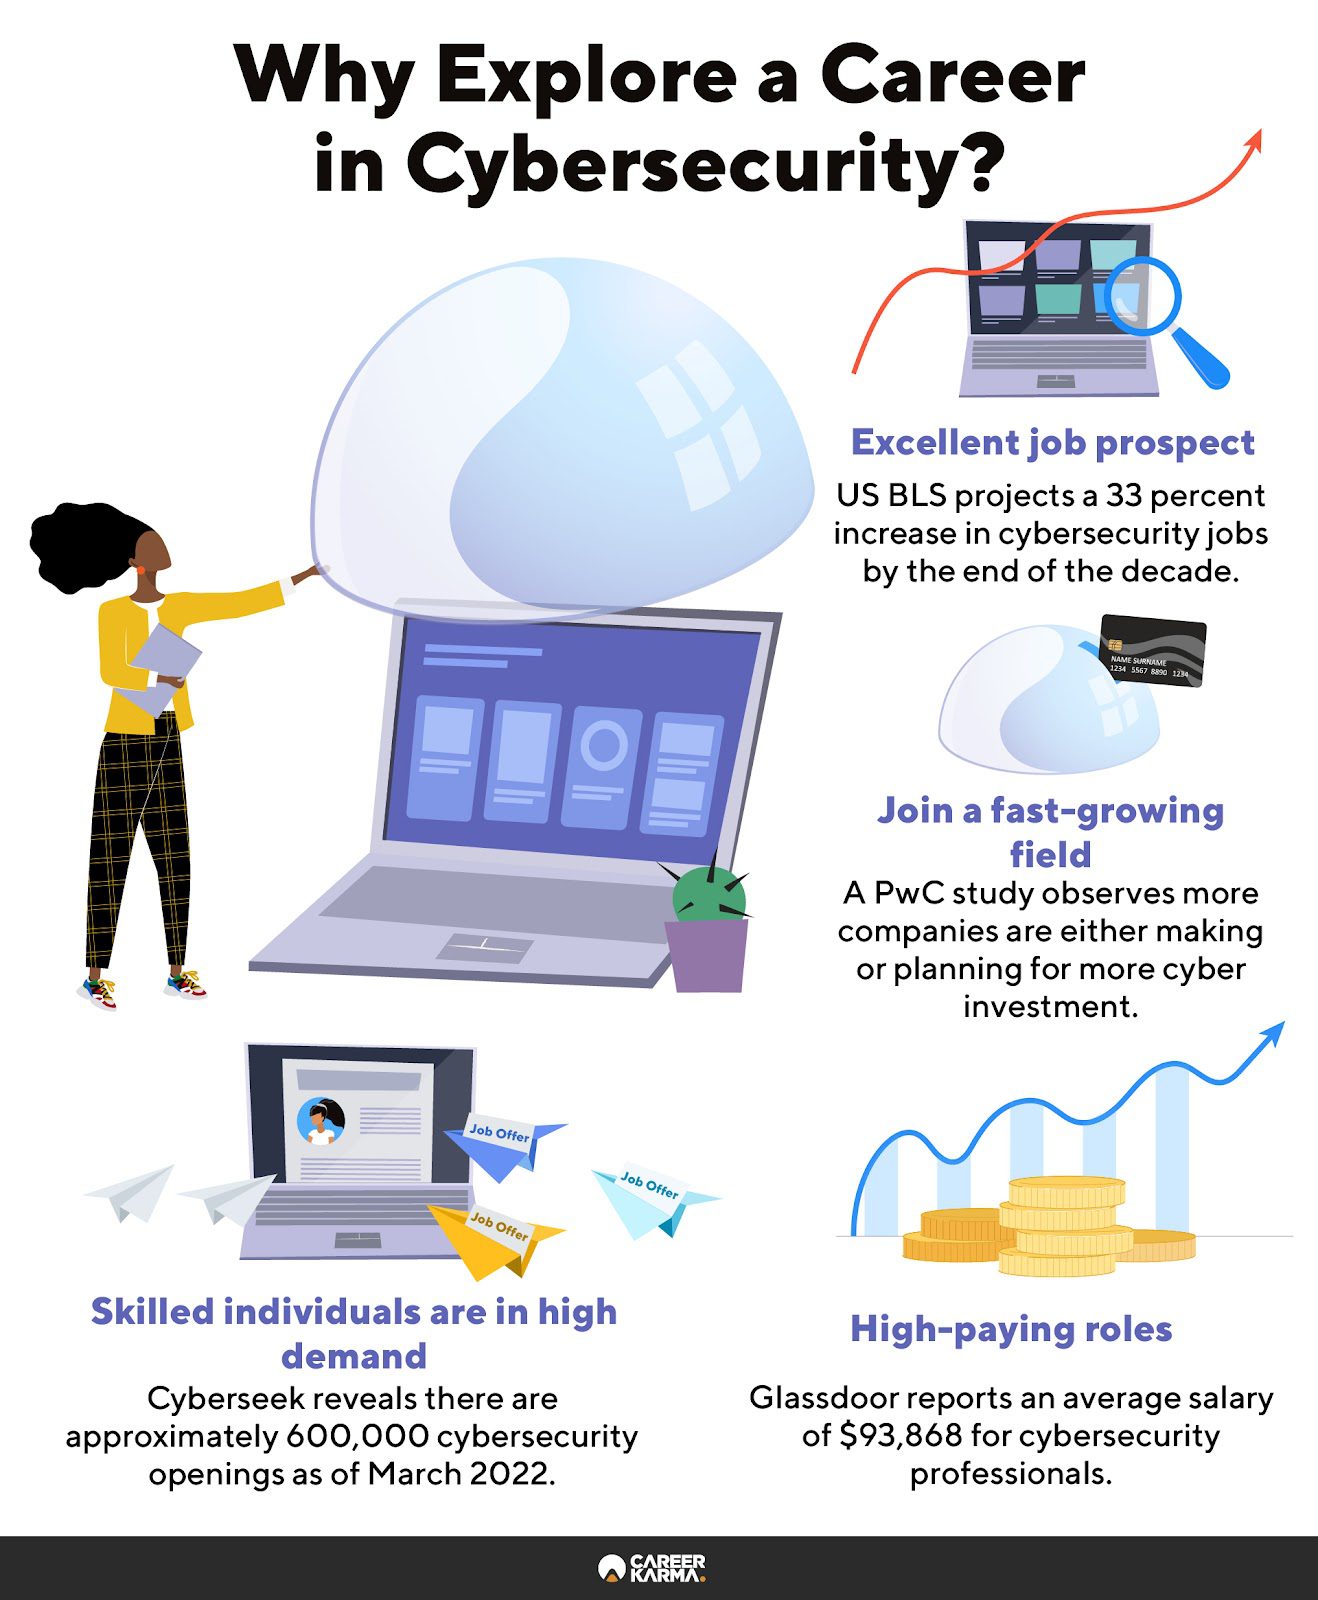 An infographic highlighting four reasons to consider a career in cybersecurity